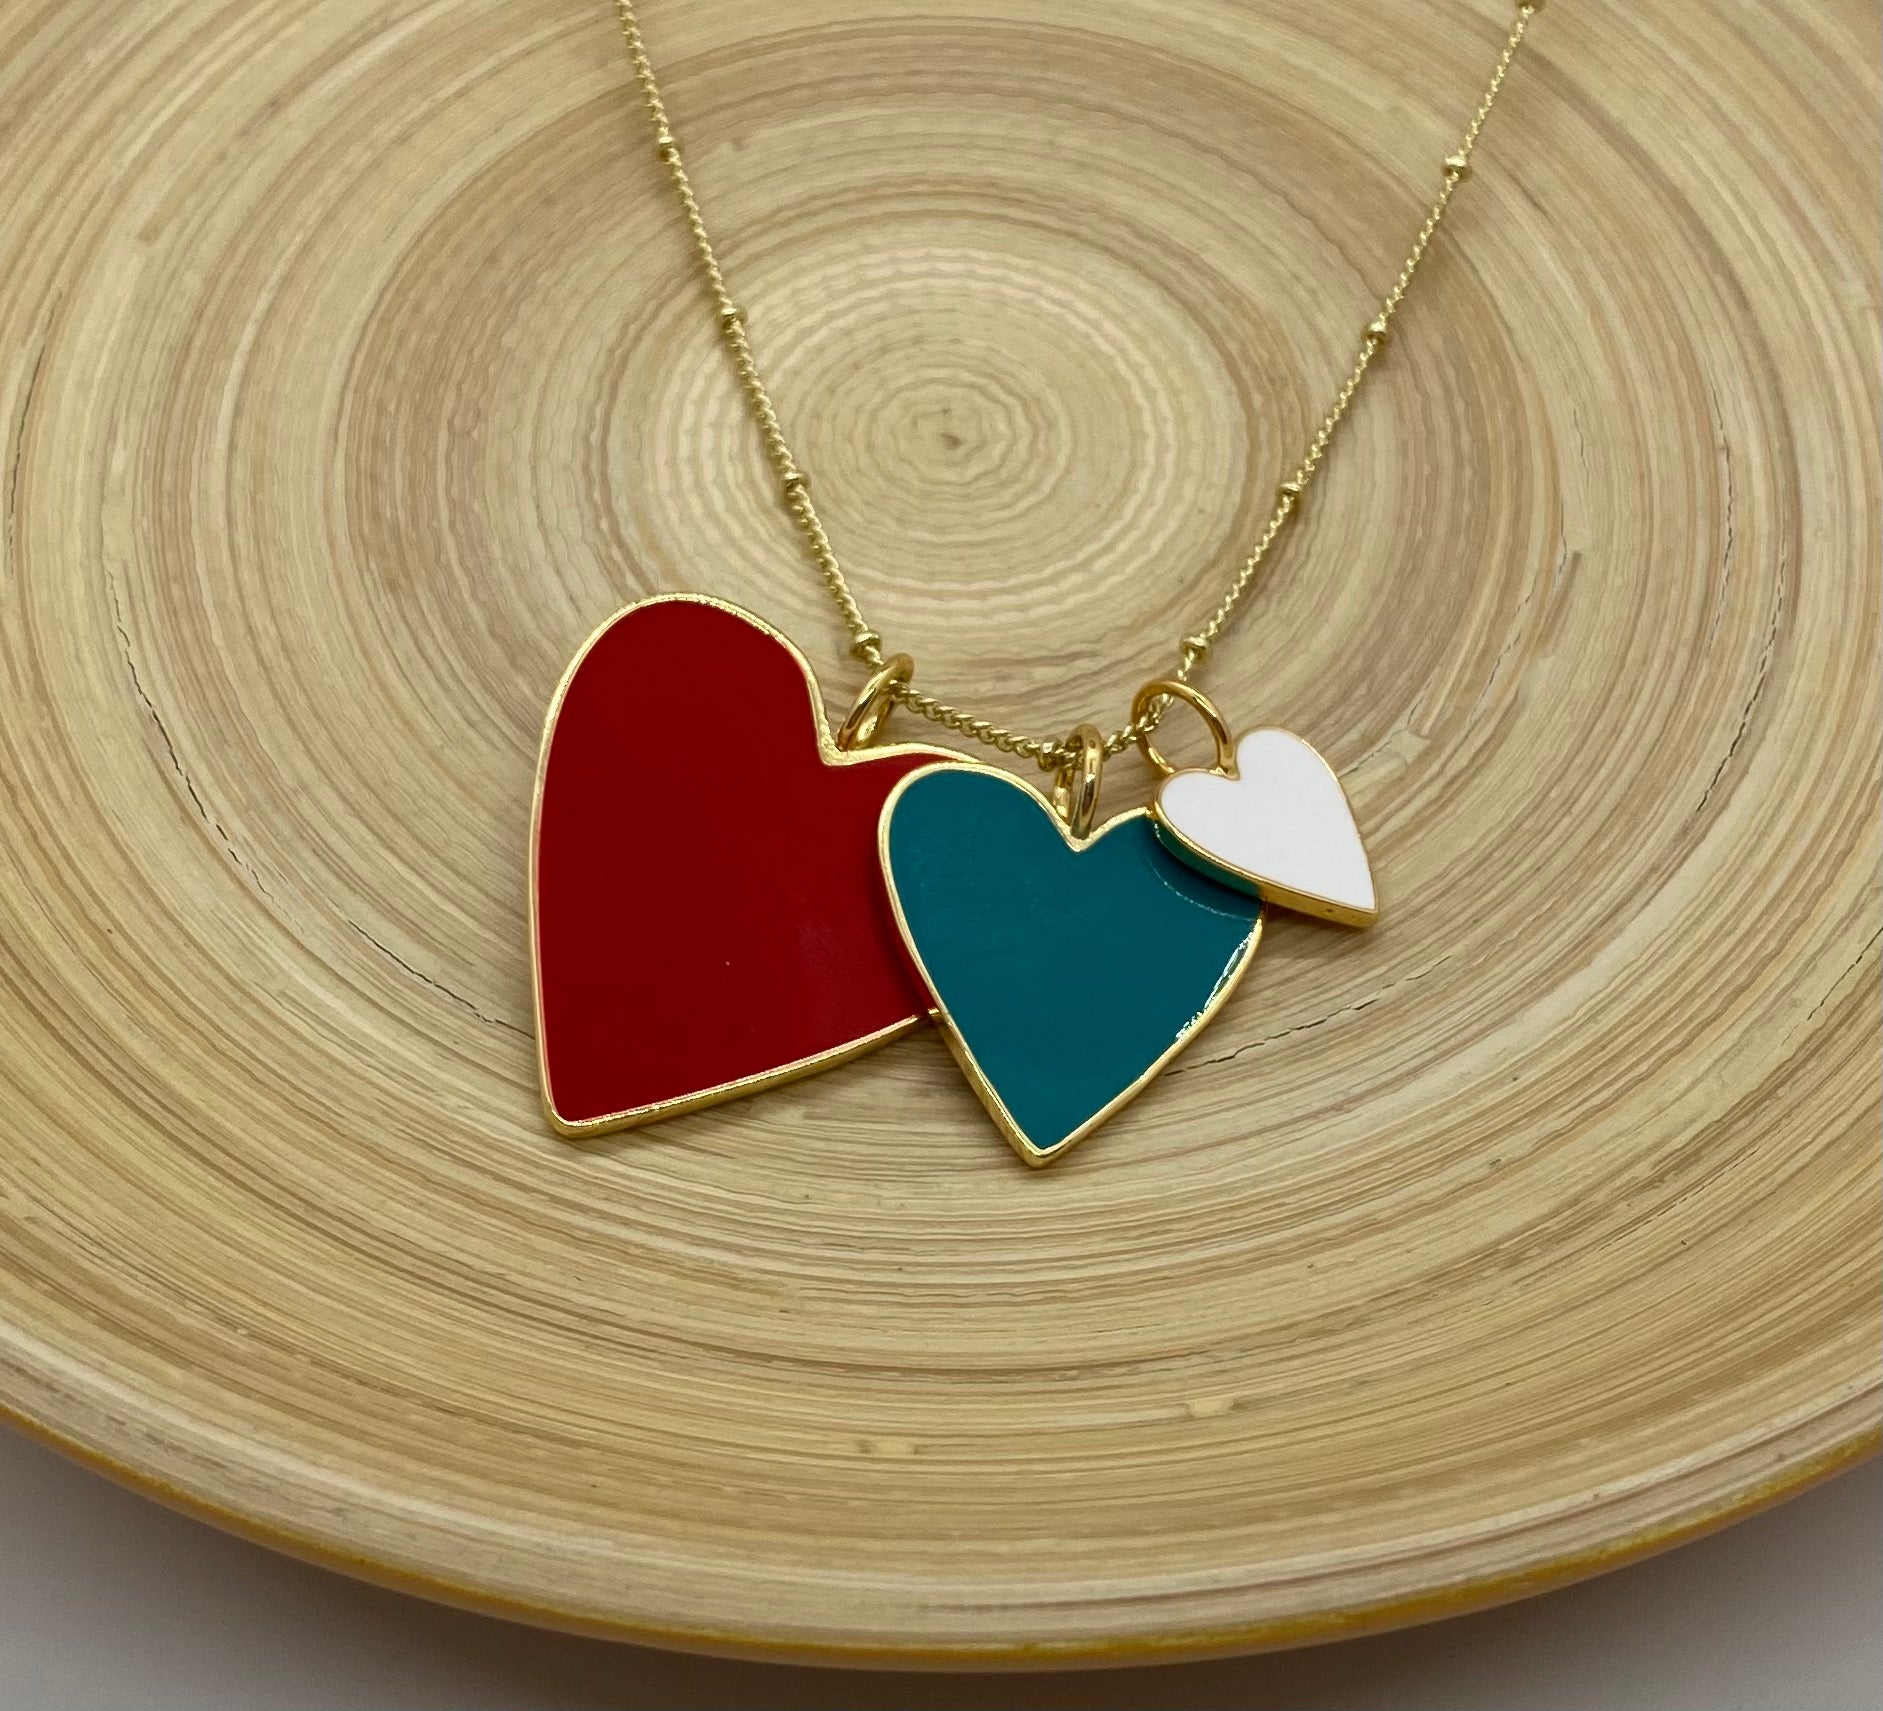 Heart Trio Necklace - Red Teal and White